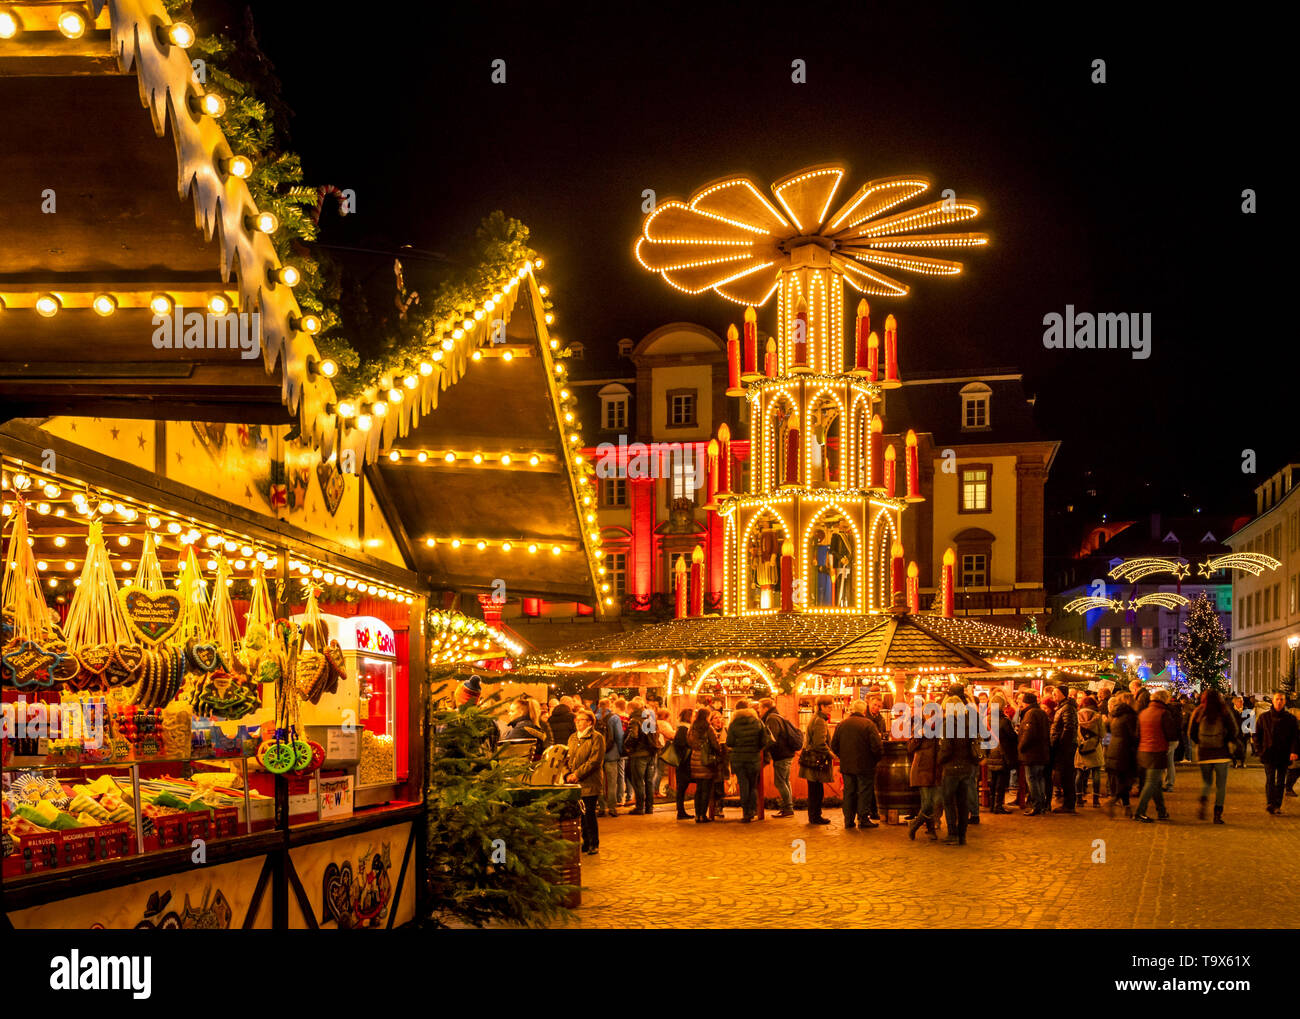 Christmas fair on the marketplace in Heidelberg, Baden-Wurttemberg, Germany, Europe, Weihnachtsmarkt am Marktplatz in Heidelberg, Baden-Württemberg, D Stock Photo